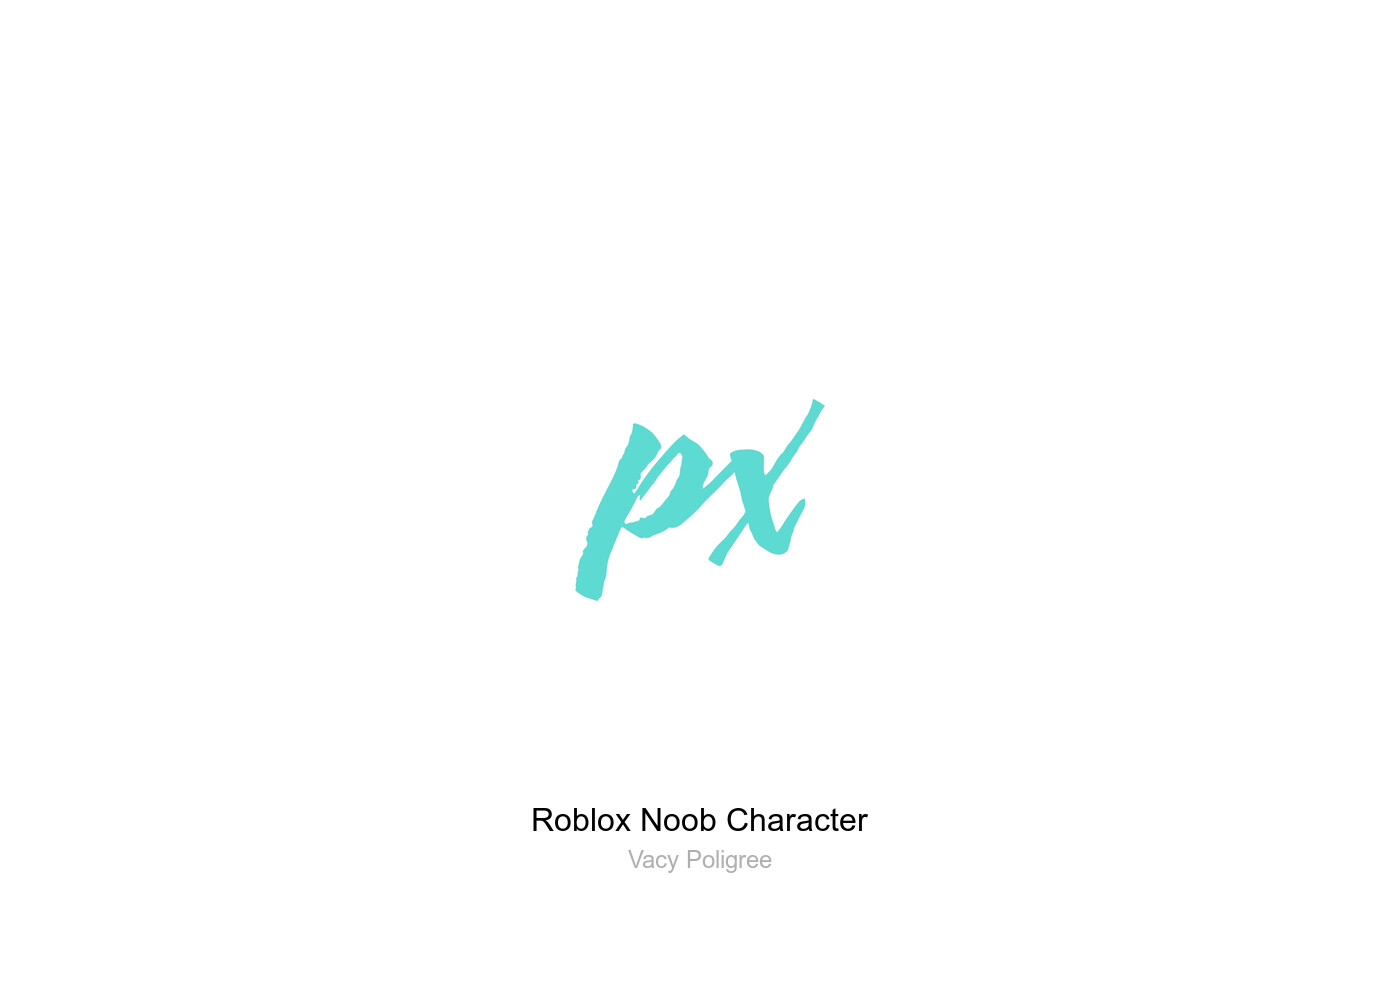 Roblox Noob Character Poster by Vacy Poligree - Pixels